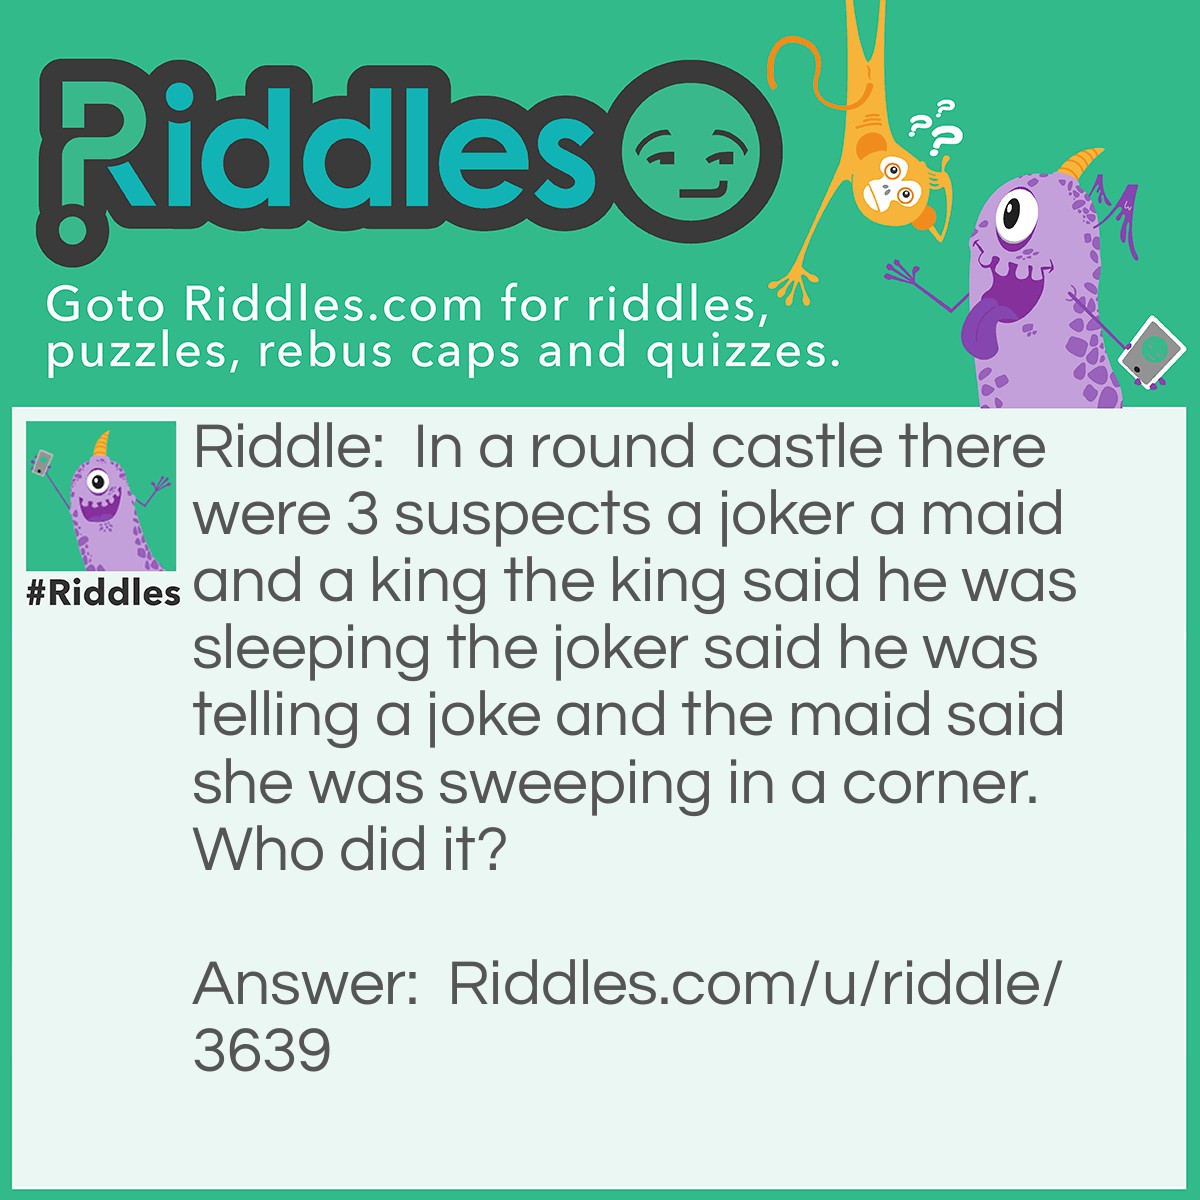 Riddle: In a round castle there were 3 suspects a joker a maid and a king the king said he was sleeping the joker said he was telling a joke and the maid said she was sweeping in a corner. Who did it? Answer: The maid there is no corners in a round castle.